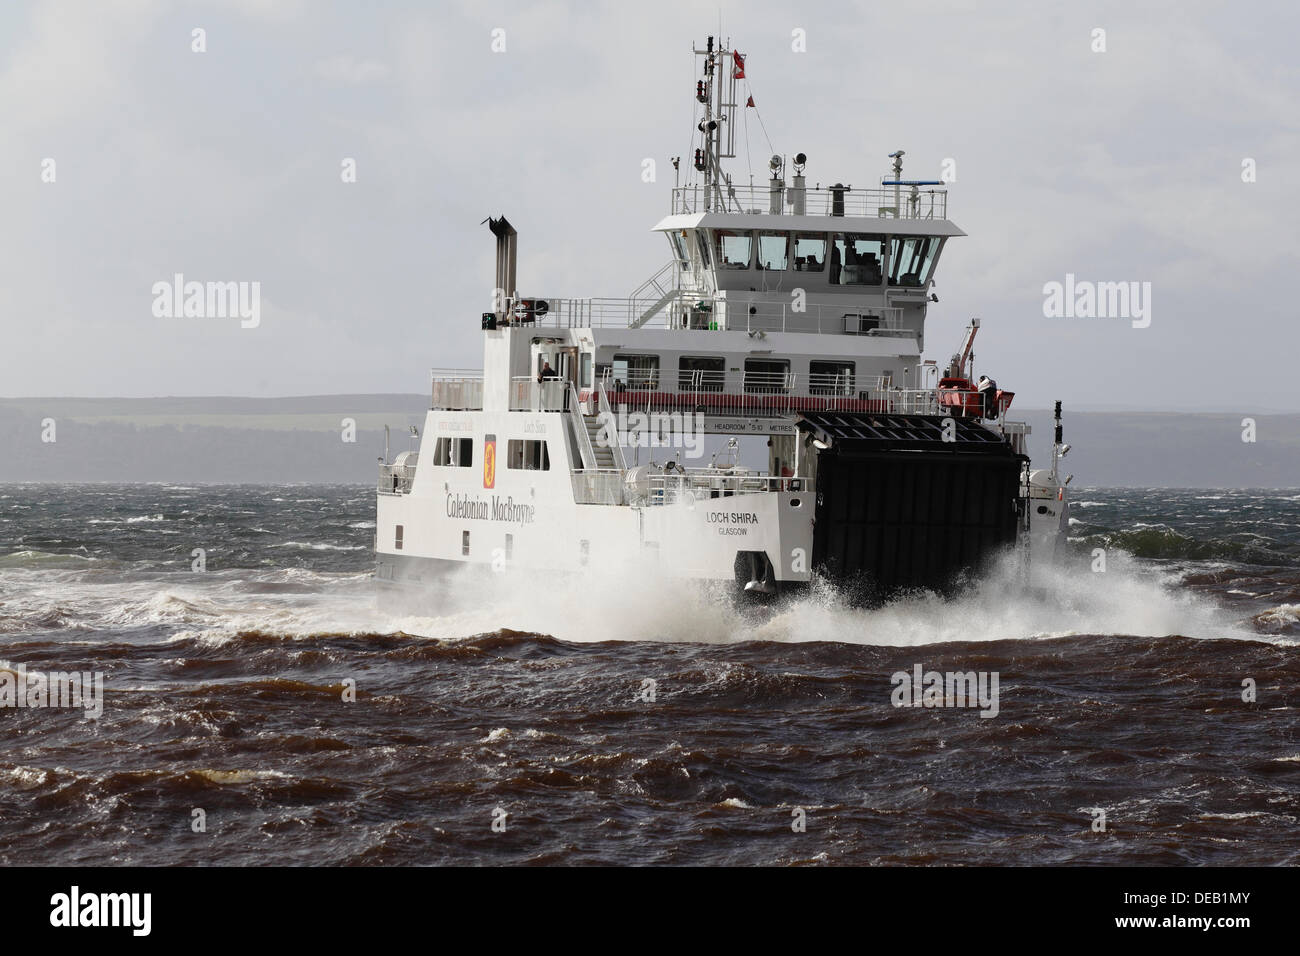 Largs, North Ayrshire, Scotland, UK, Sunday, 15th September, 2013. The Caledonian MacBrayne Ferry Loch Shira sailing in high winds from the Island of Great Cumbrae to the town of Largs on the Firth of Clyde Stock Photo